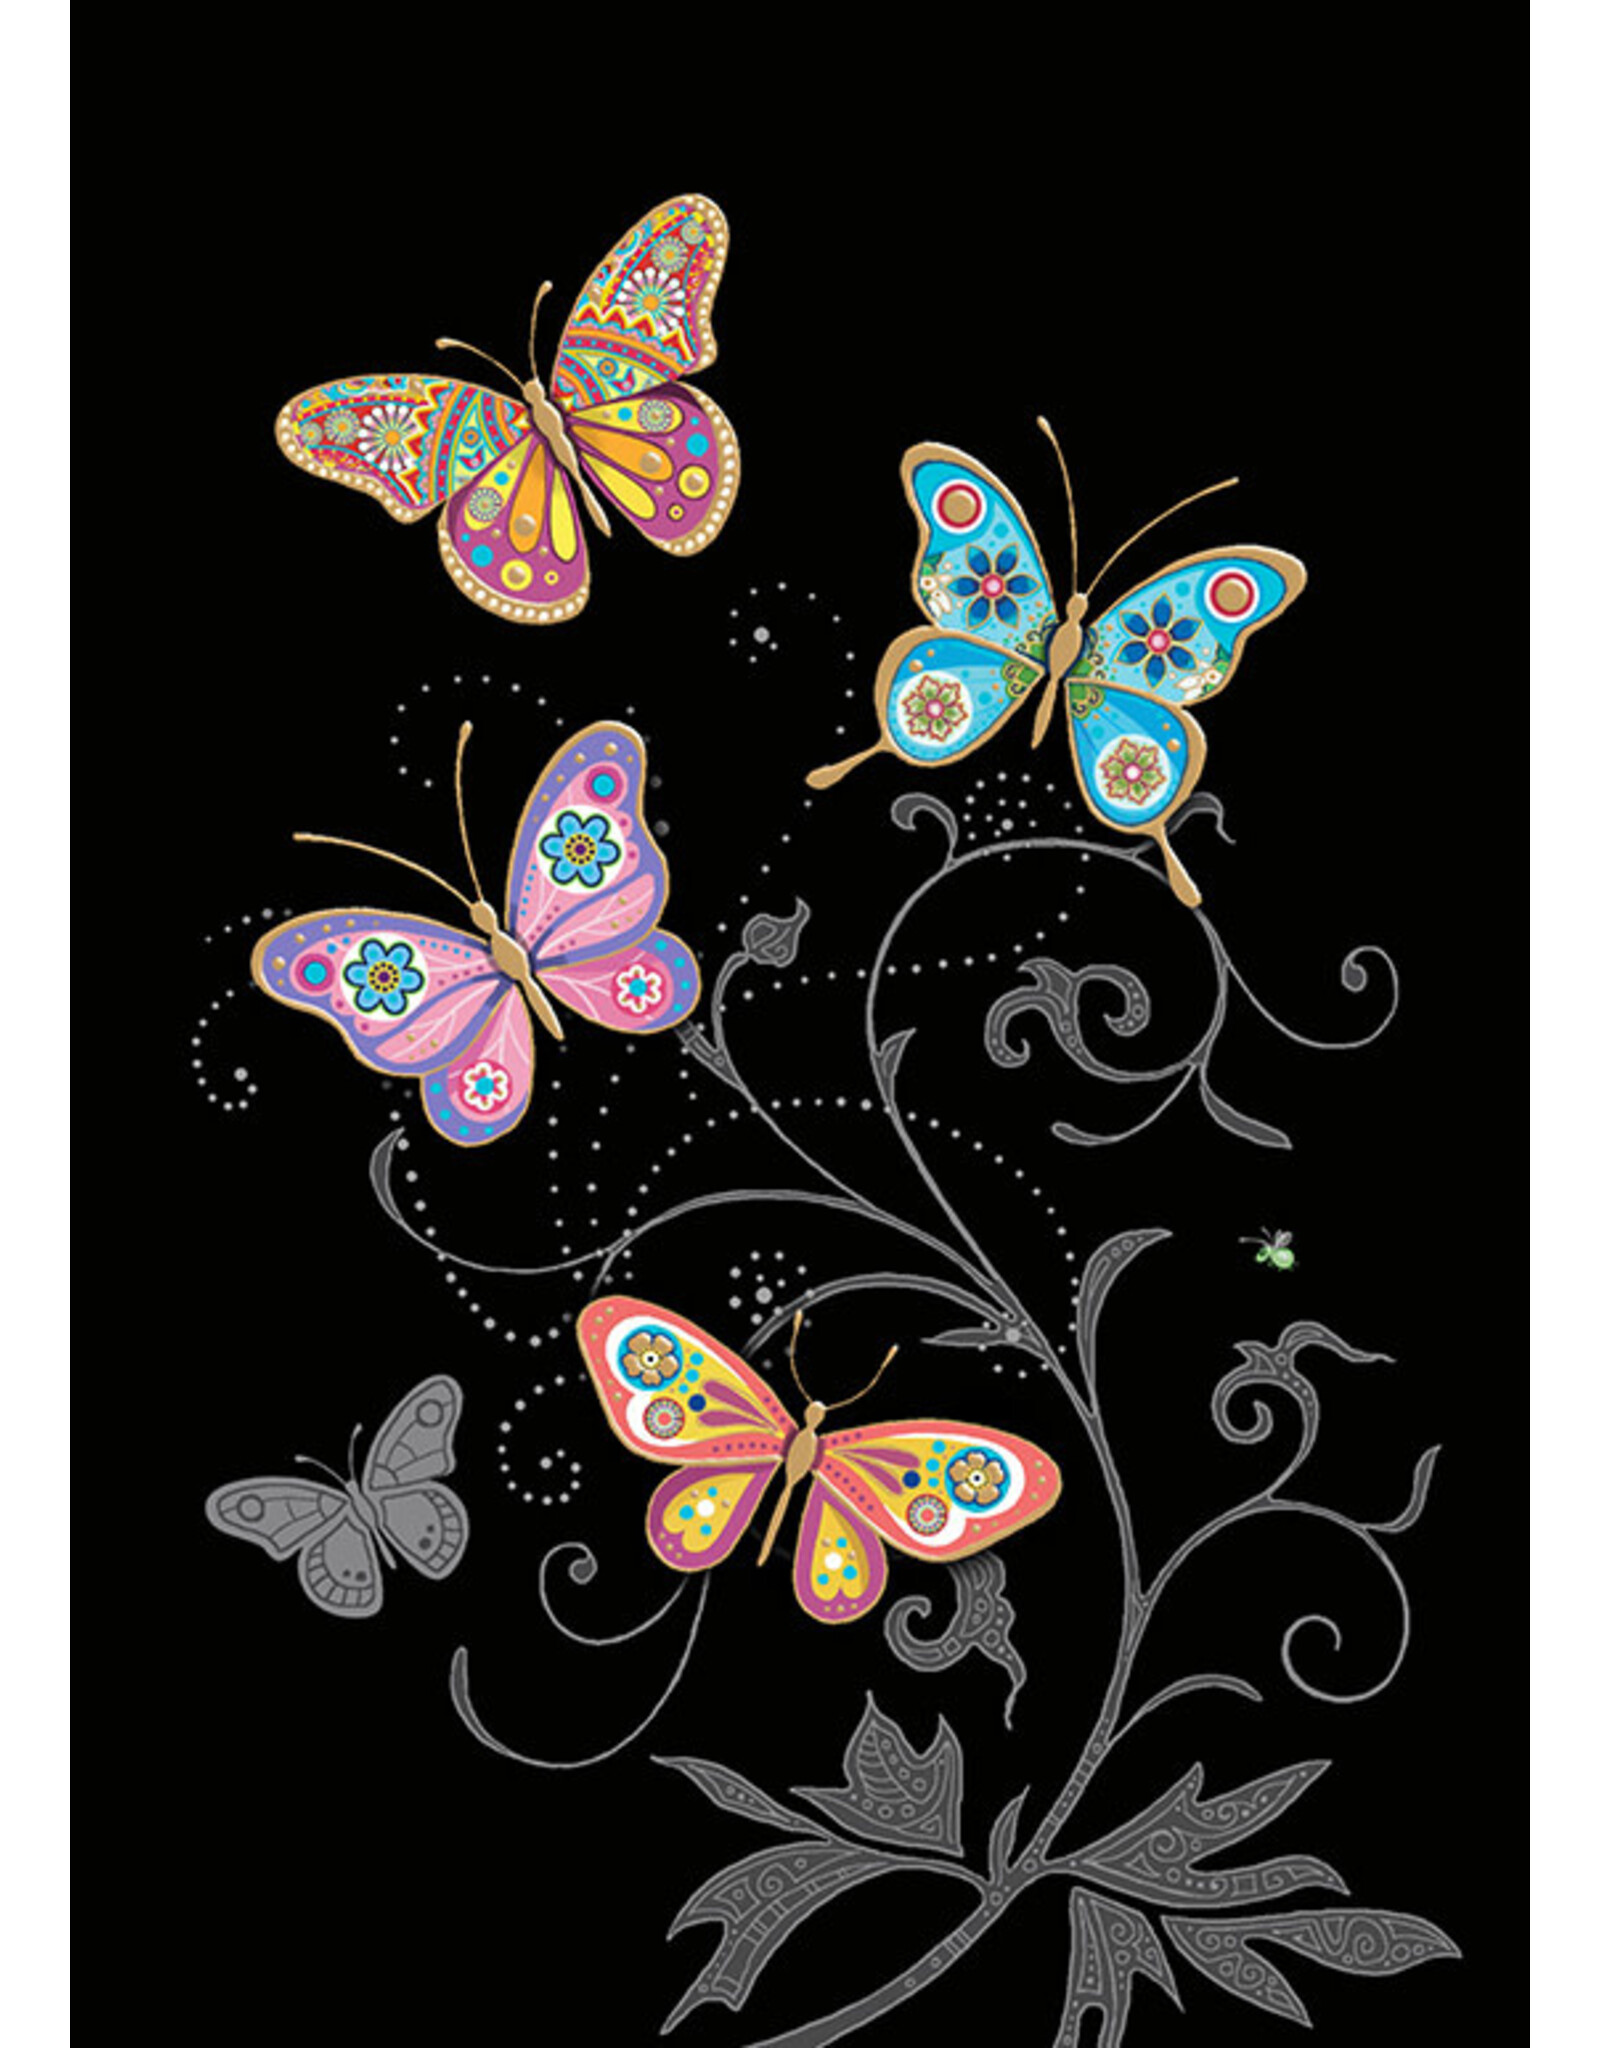 BugArt Jewels (BugArt) "Butterfly Display"